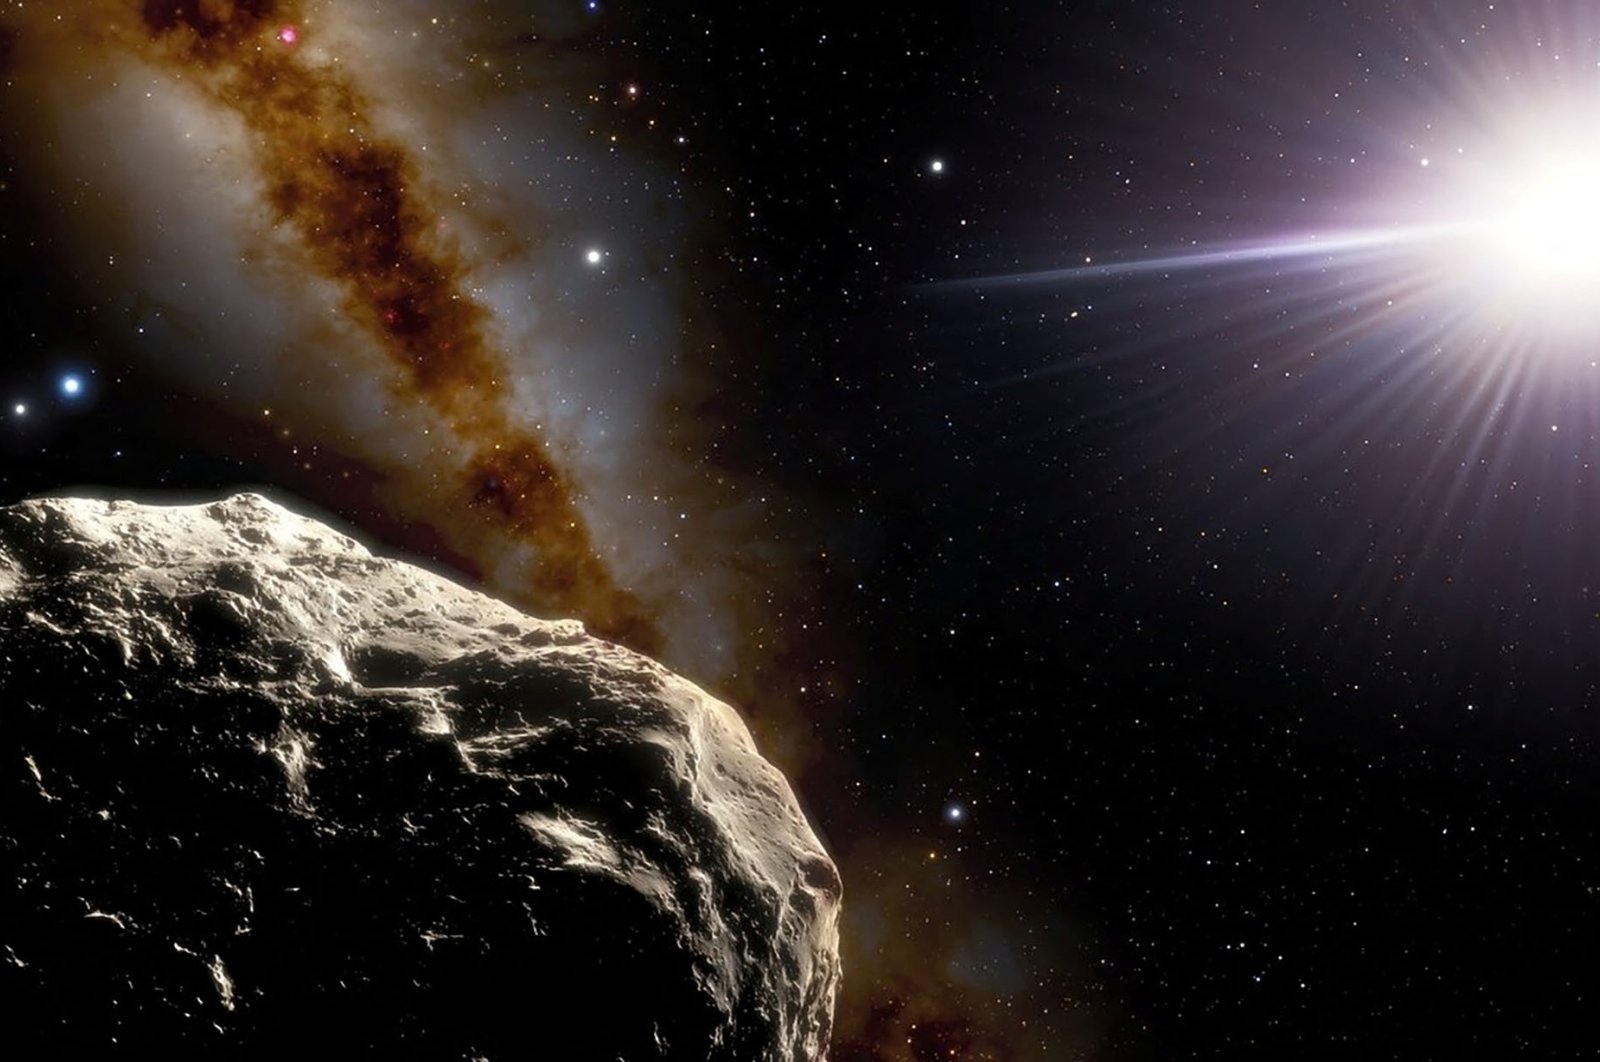 2020 XL5, an asteroid companion to Earth that orbits the sun along the same path as our planet, can be seen in this undated illustration. (Reuters Photo)